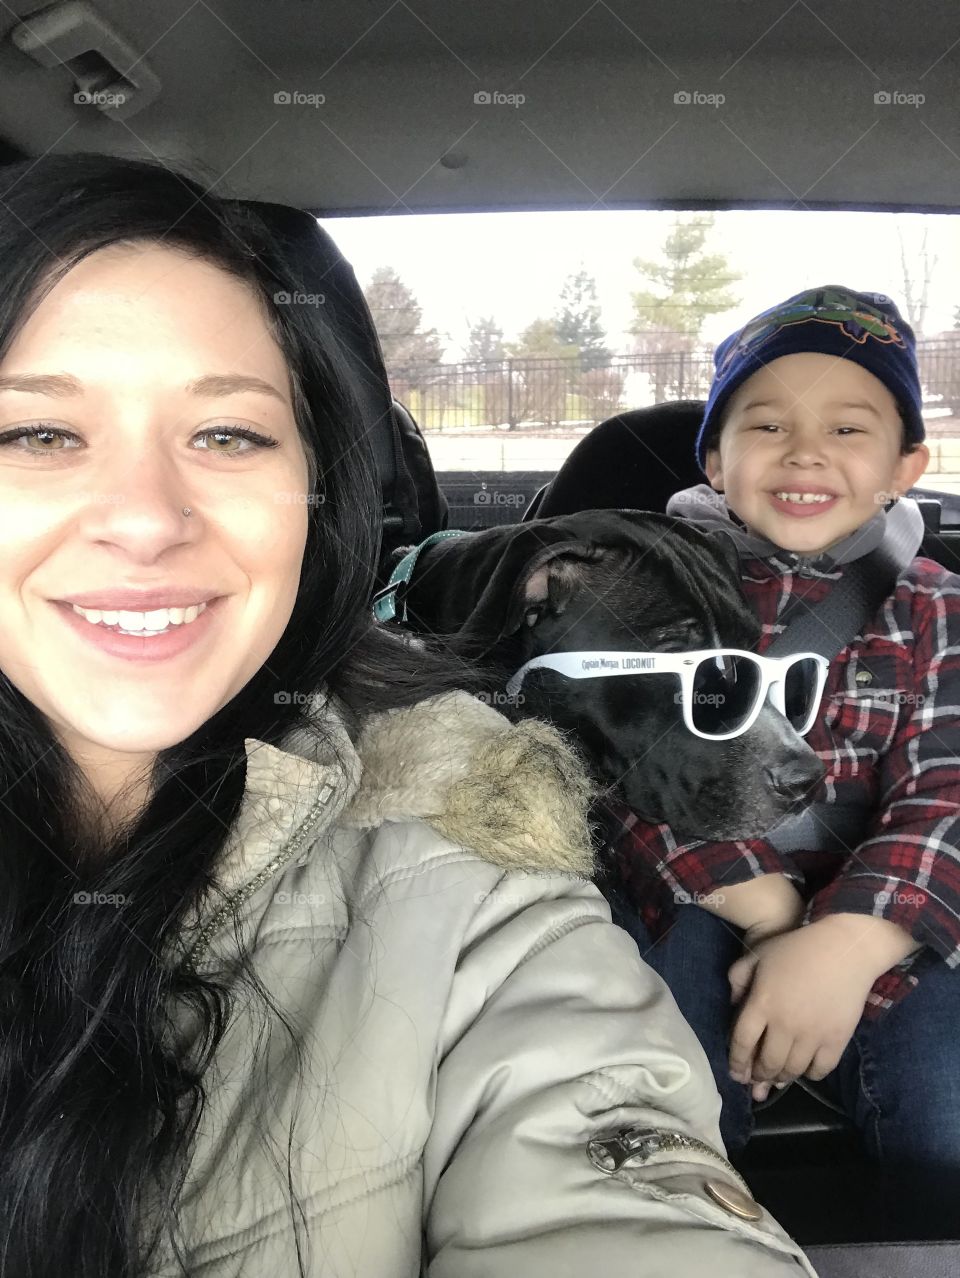 Me with my little brother and my pit bull baby, he put his glasses on her! She doesn’t mind at all!